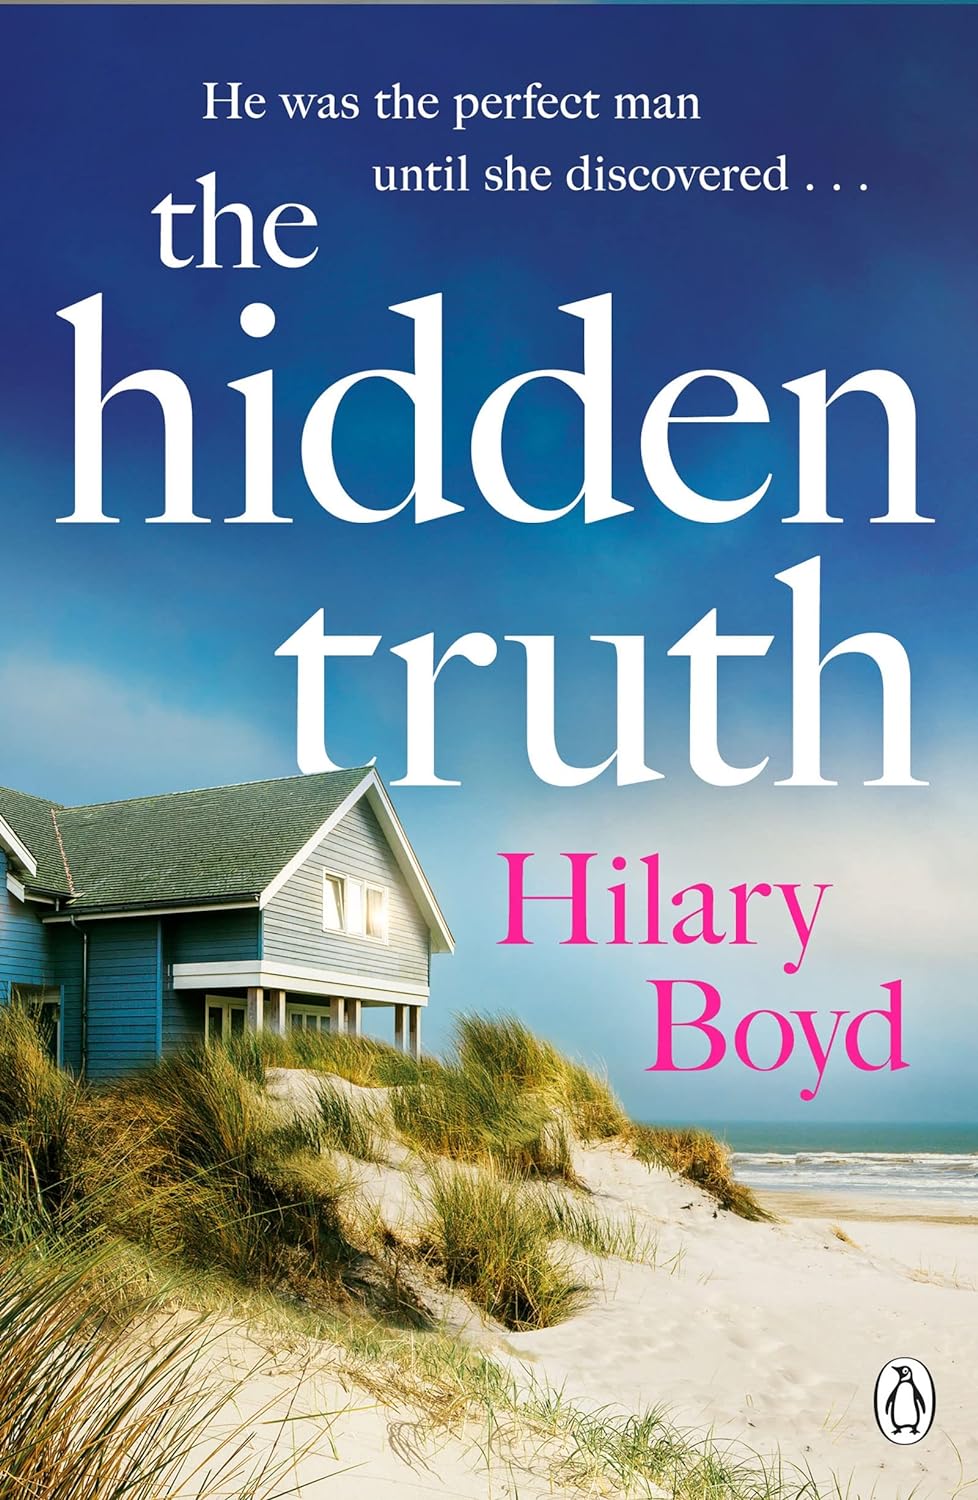 The Hidden Truth: The gripping and suspenseful story of love, heartbreak and one devastating confession Paperback – August 4, 2022